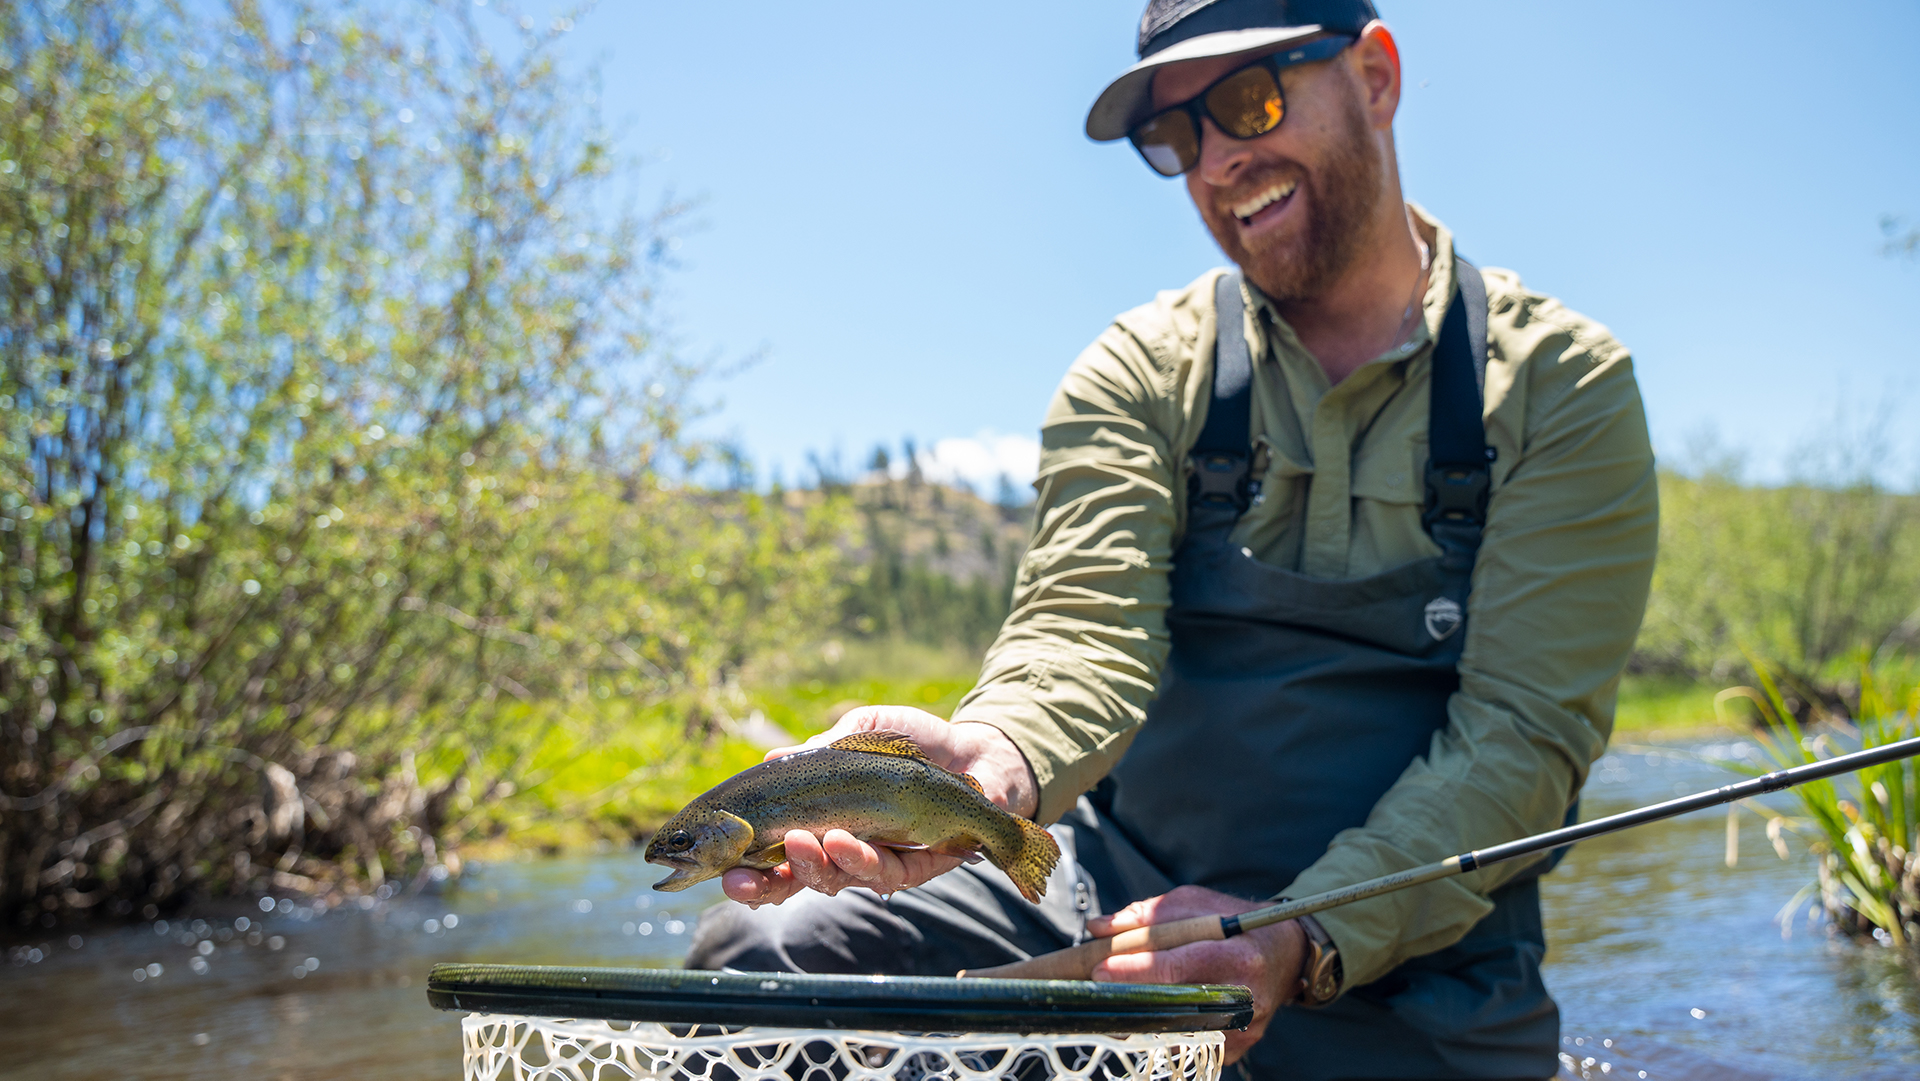 A Relentless Pursuit of the Apache Trout, Duct Tape Diaries